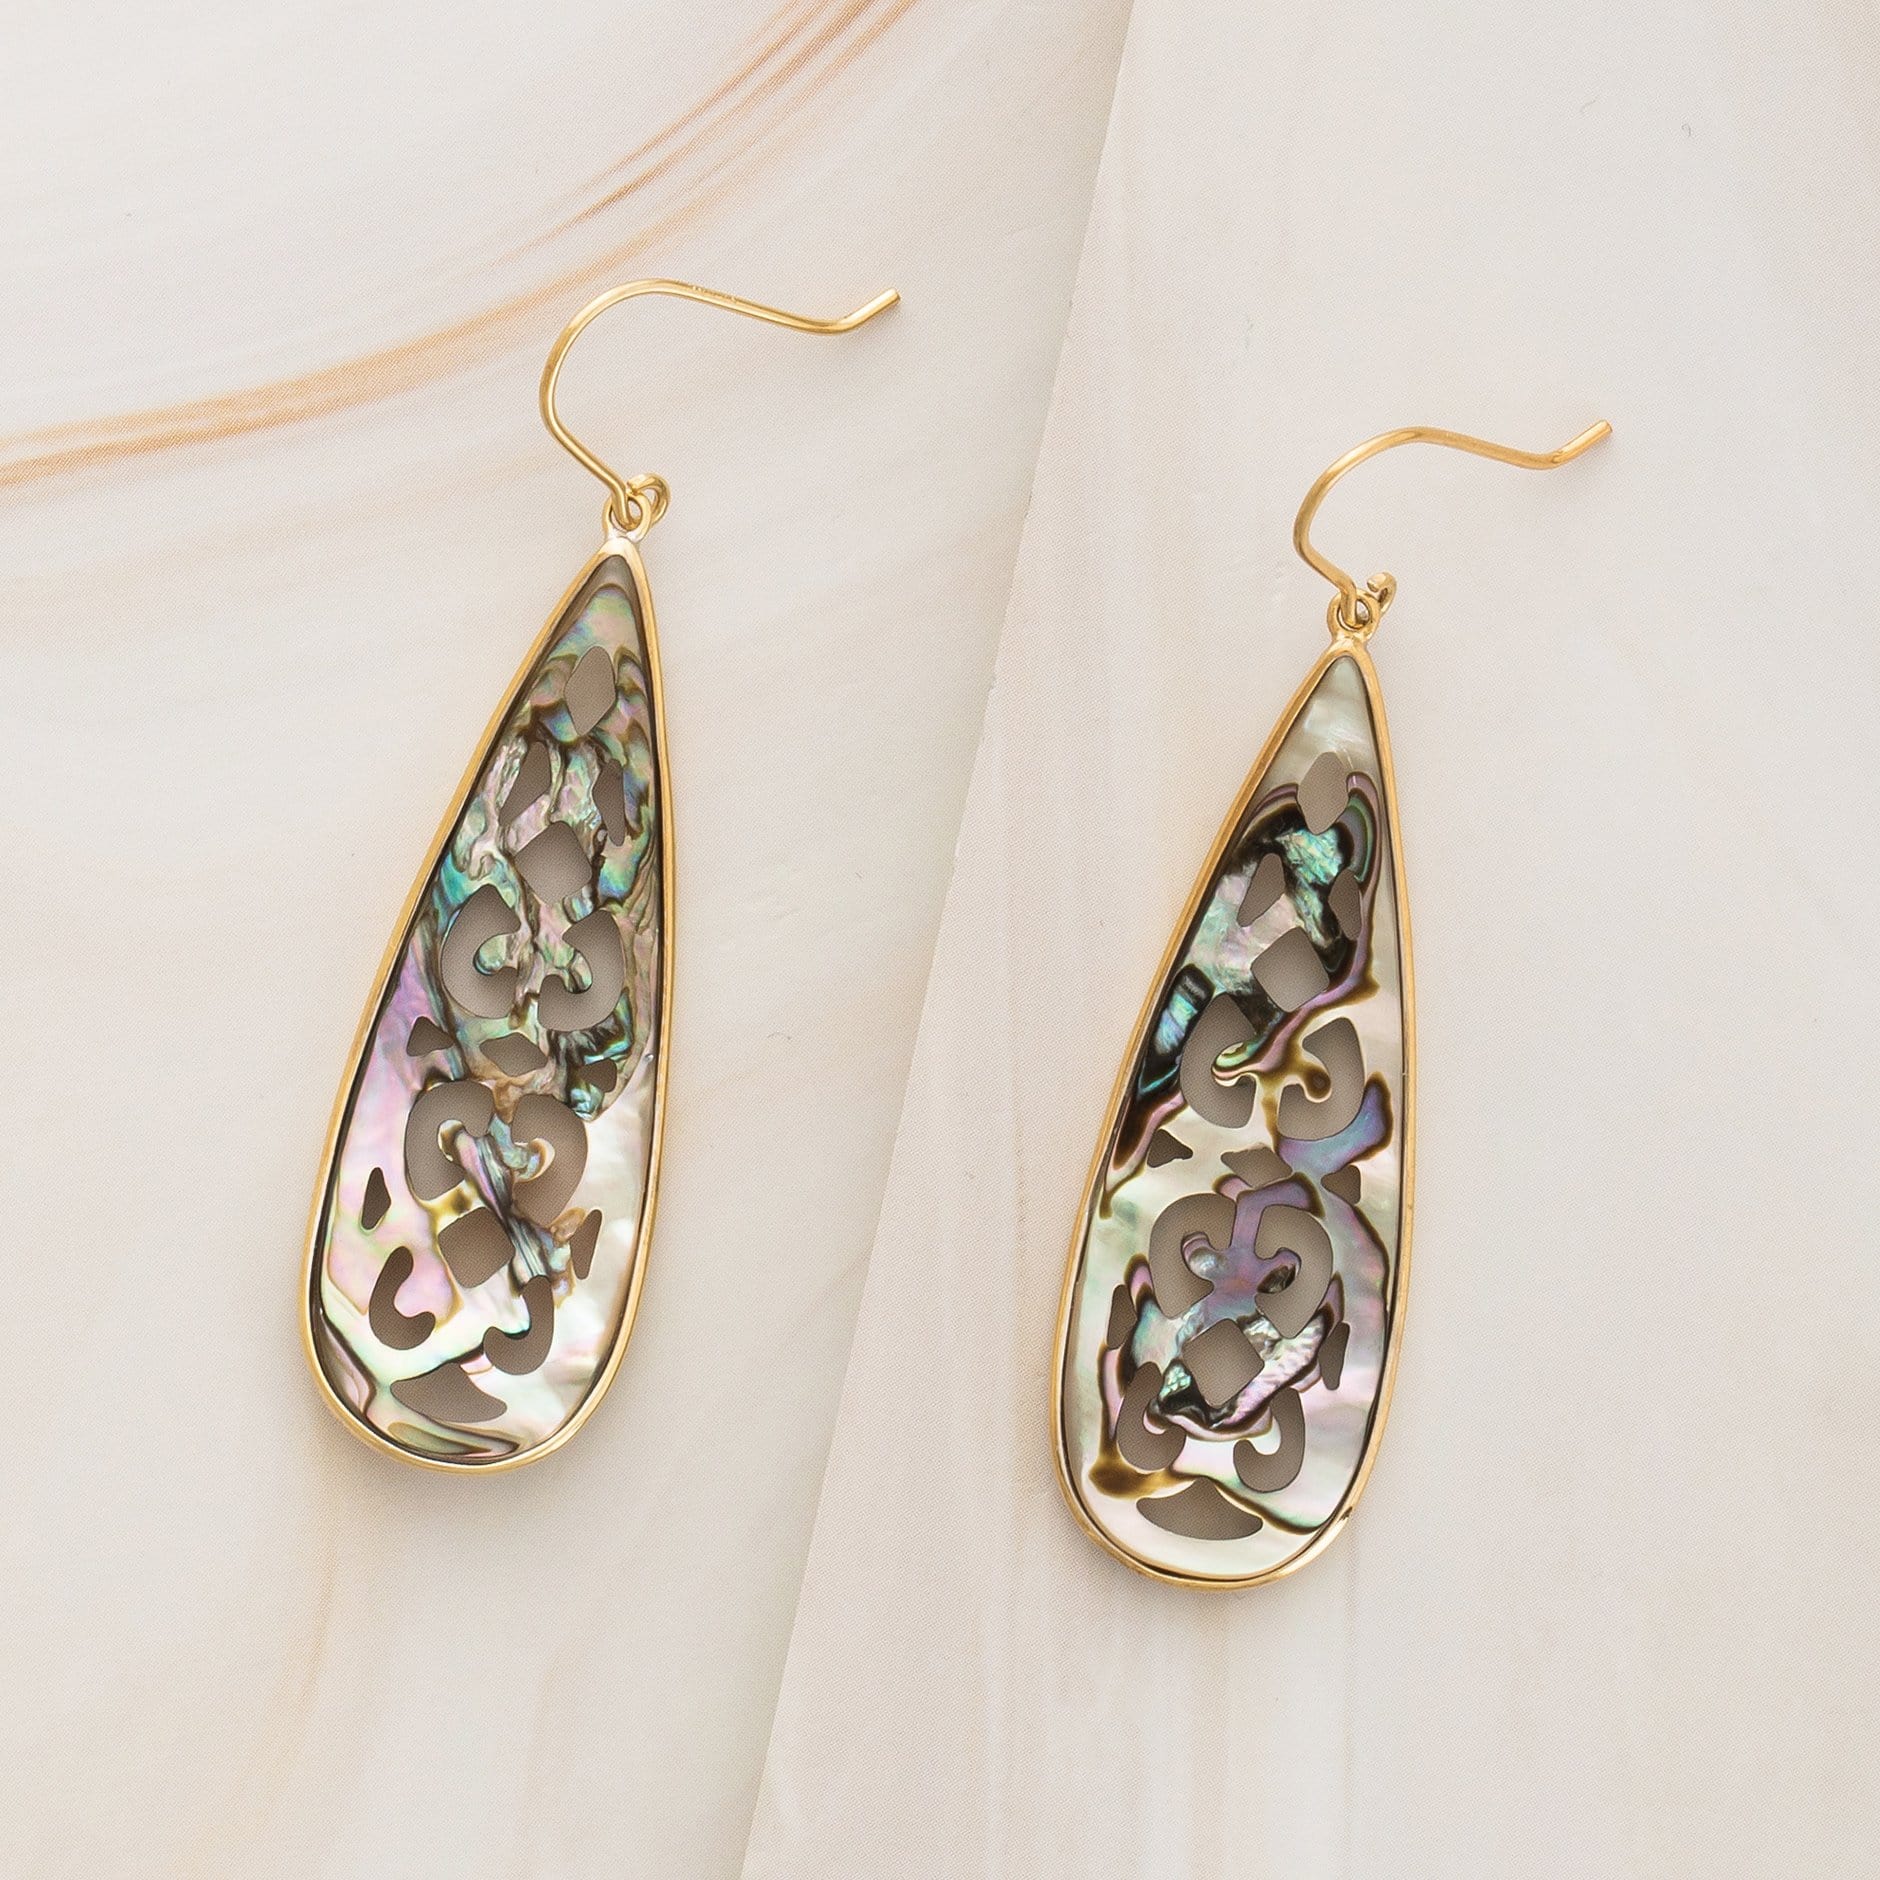 Micki Olaguer Earrings Gold Tone / Peacock Cathedral Mother-of-Pearl Drop Earrings